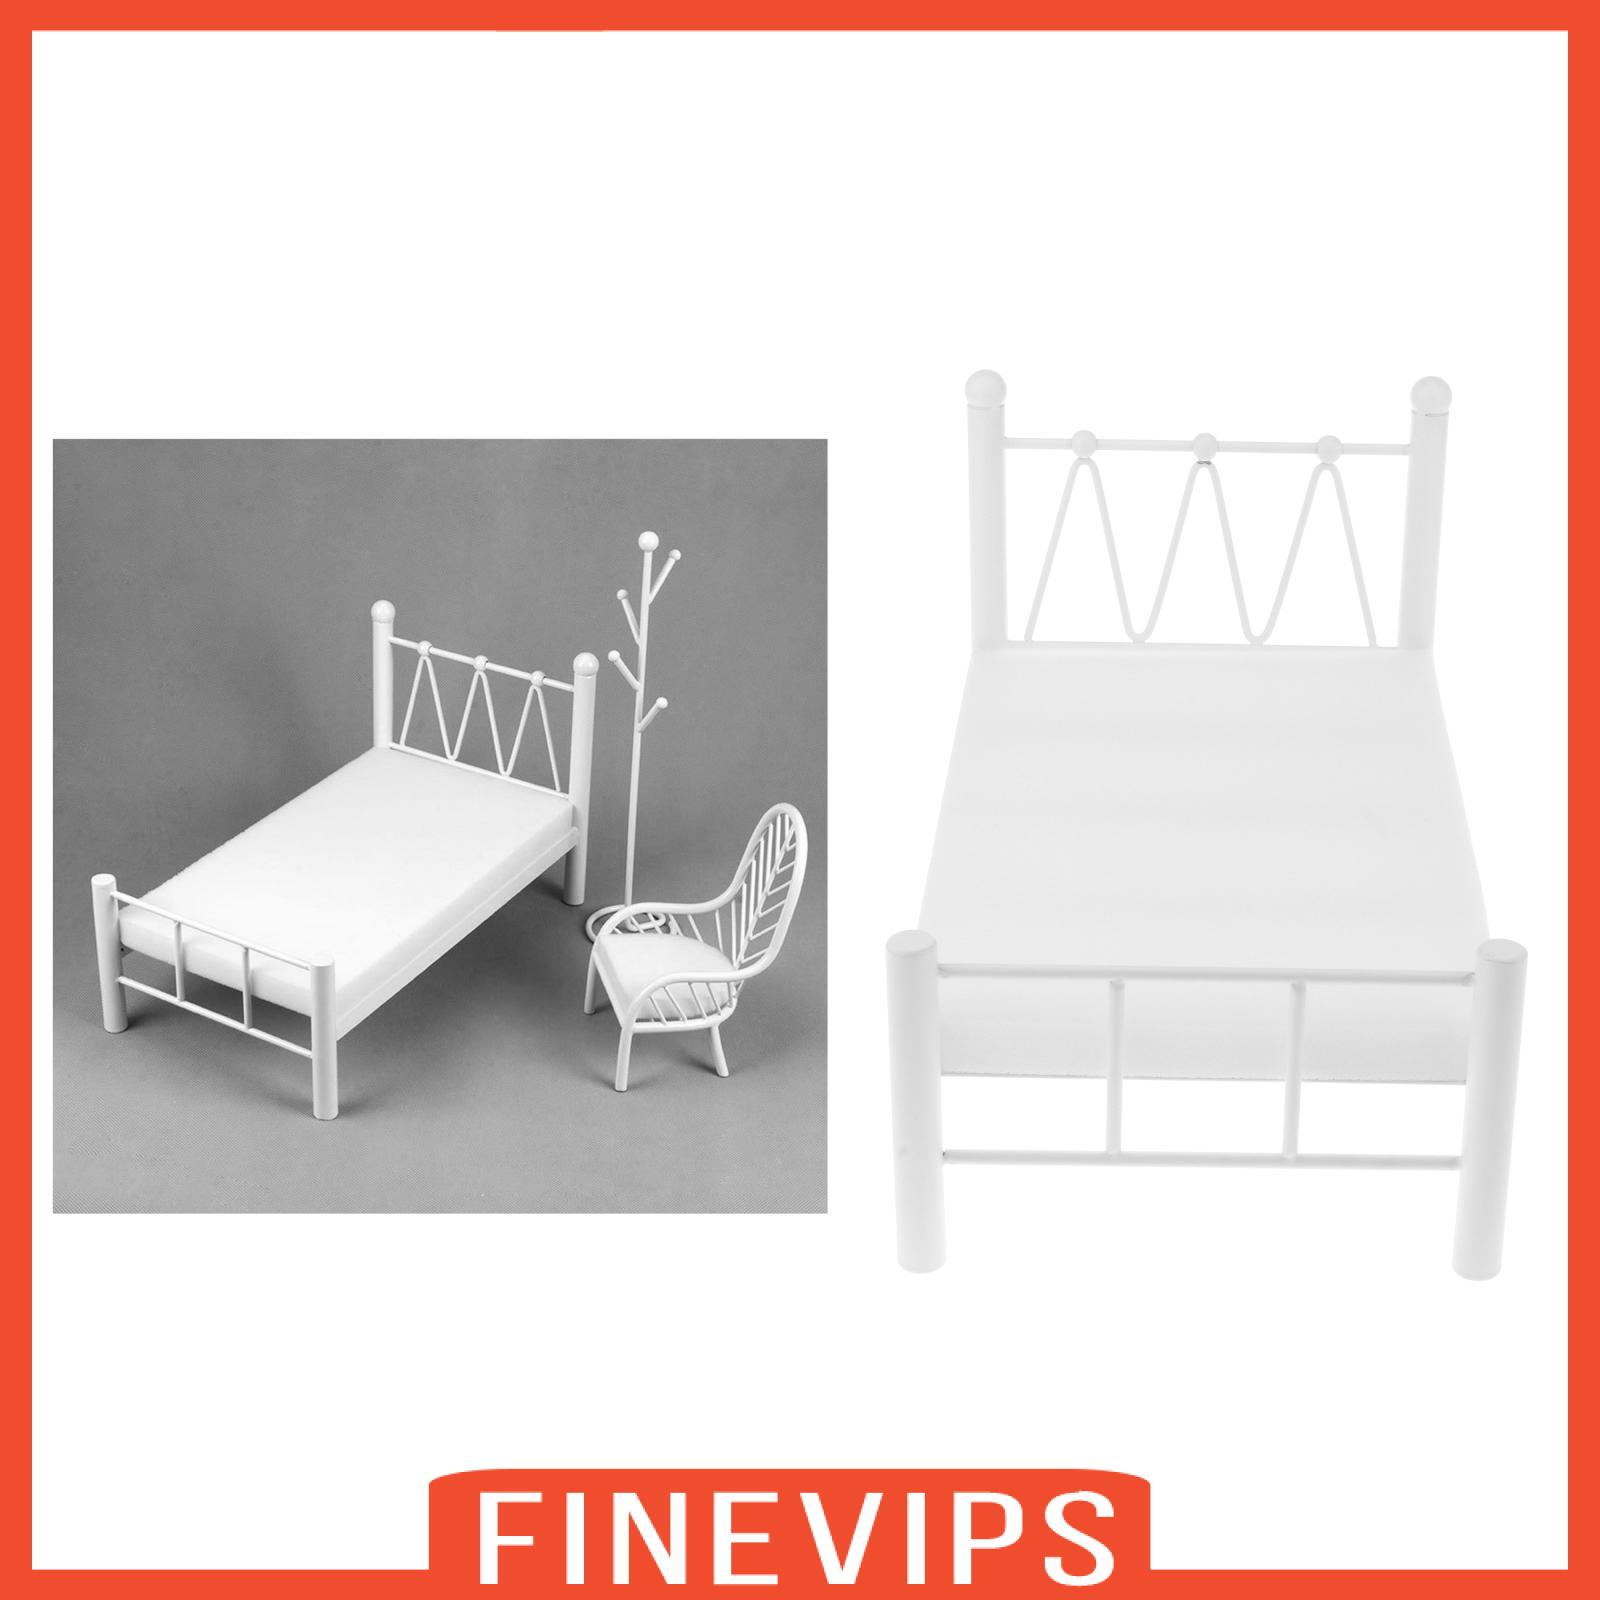 [FINEVIPS]Baby Doll Accessories Metal Bedroom Furniture Set Decoration for 1/6 Blythe Doll Accessories 3 Year Old Girls and Up